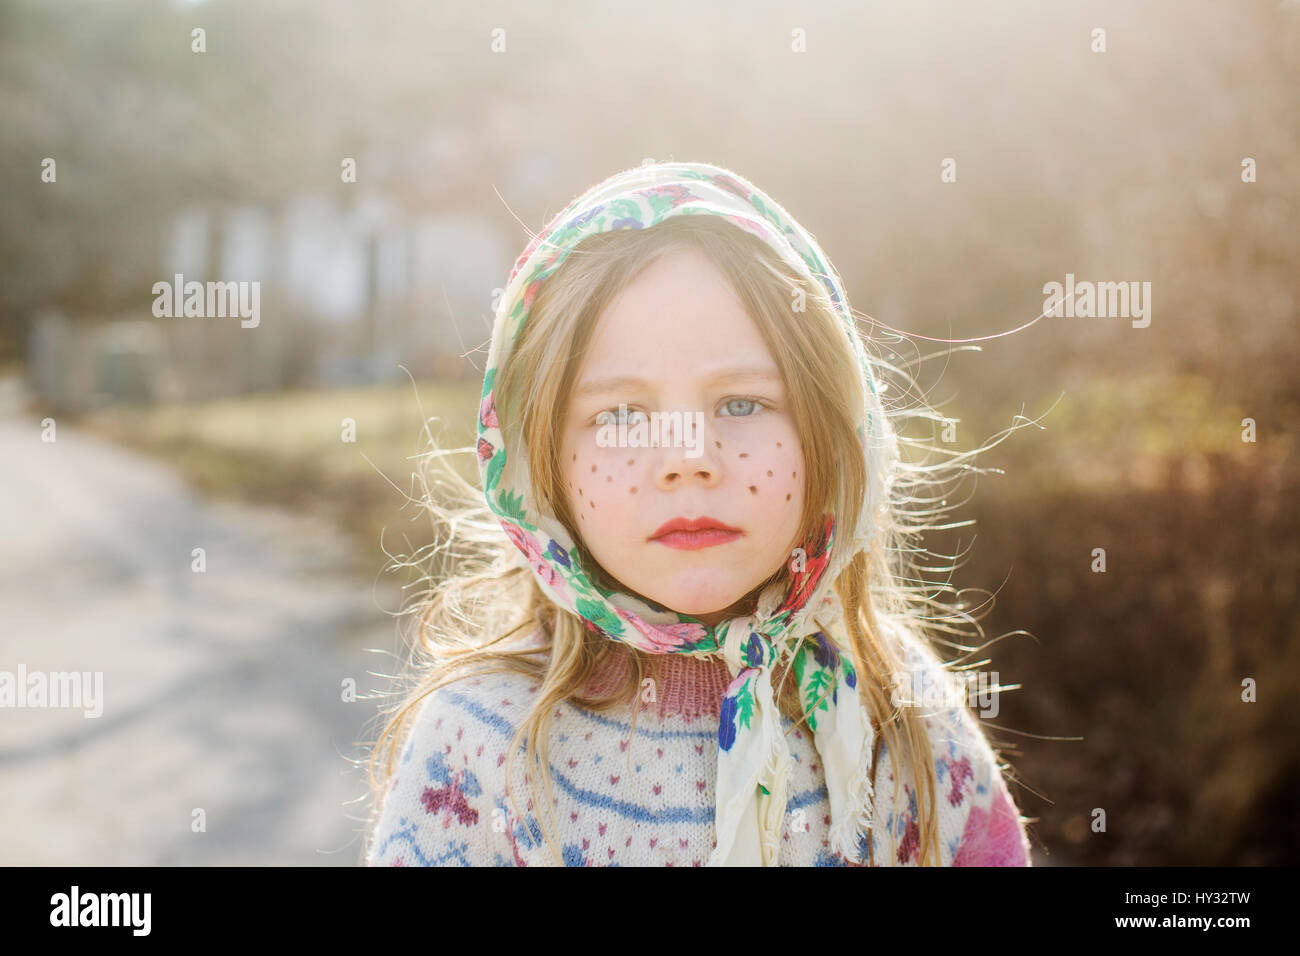 Sweden, Portrait of girl (4-5) dressed up as Easter witch wearing headscarf Stock Photo